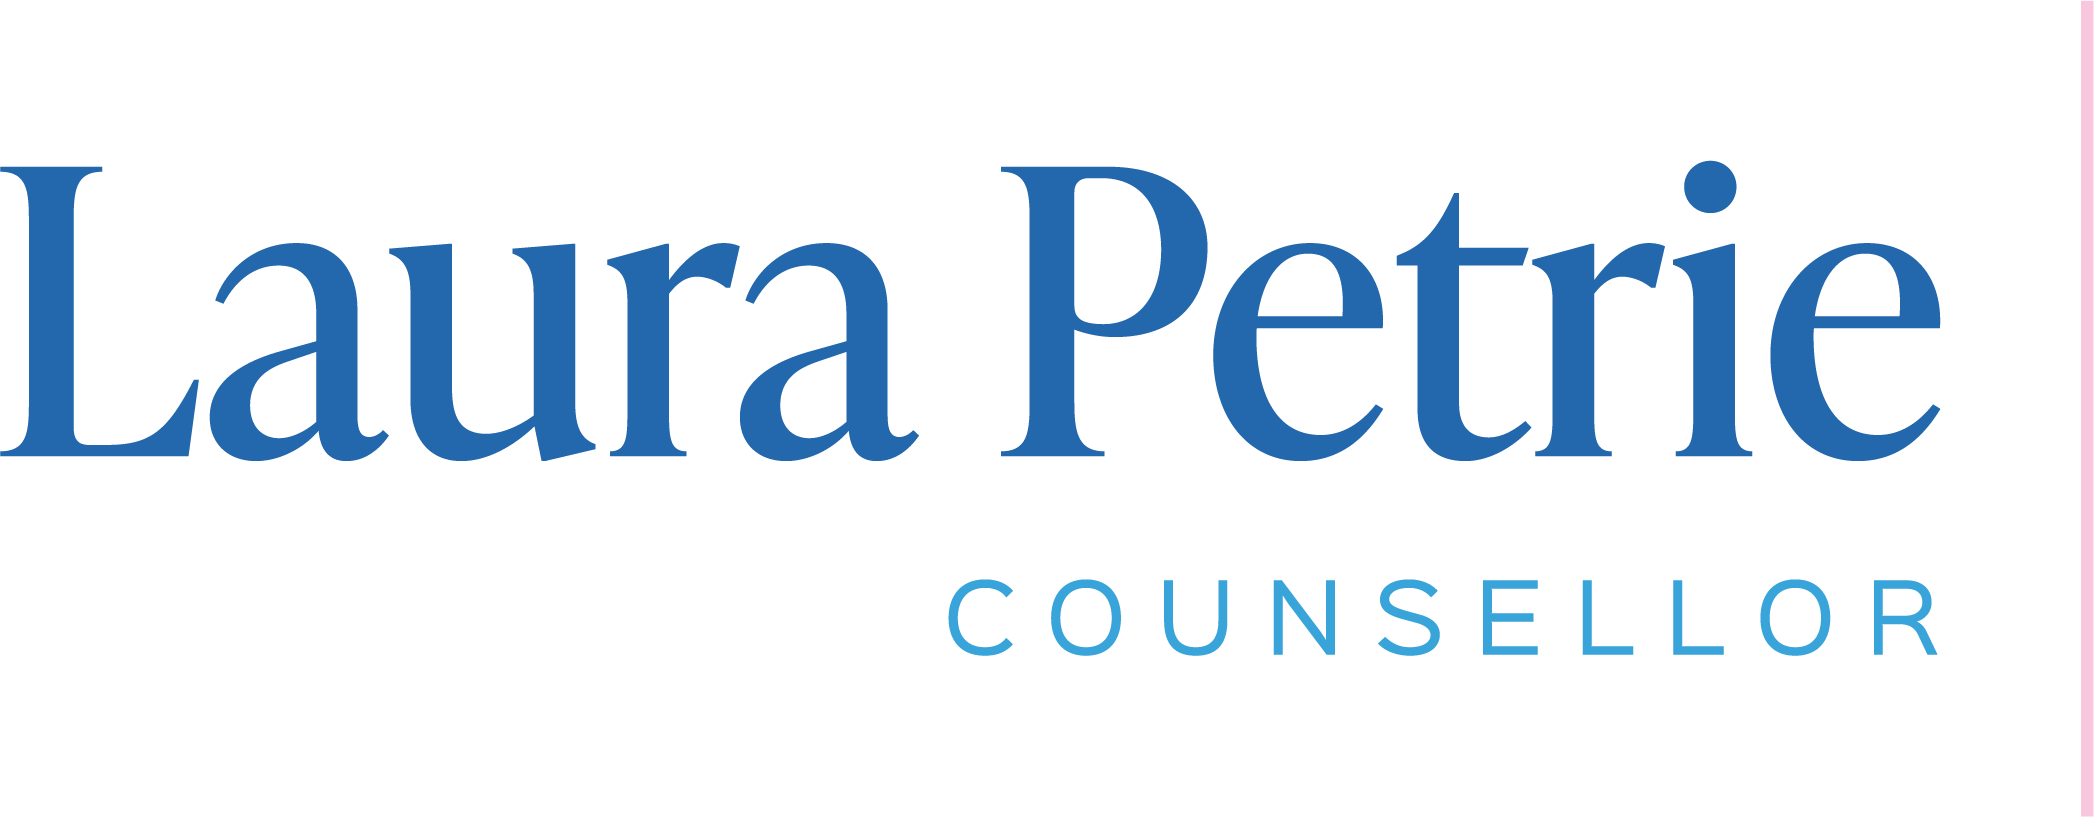 Logo for Laura Petrie Counsellor.